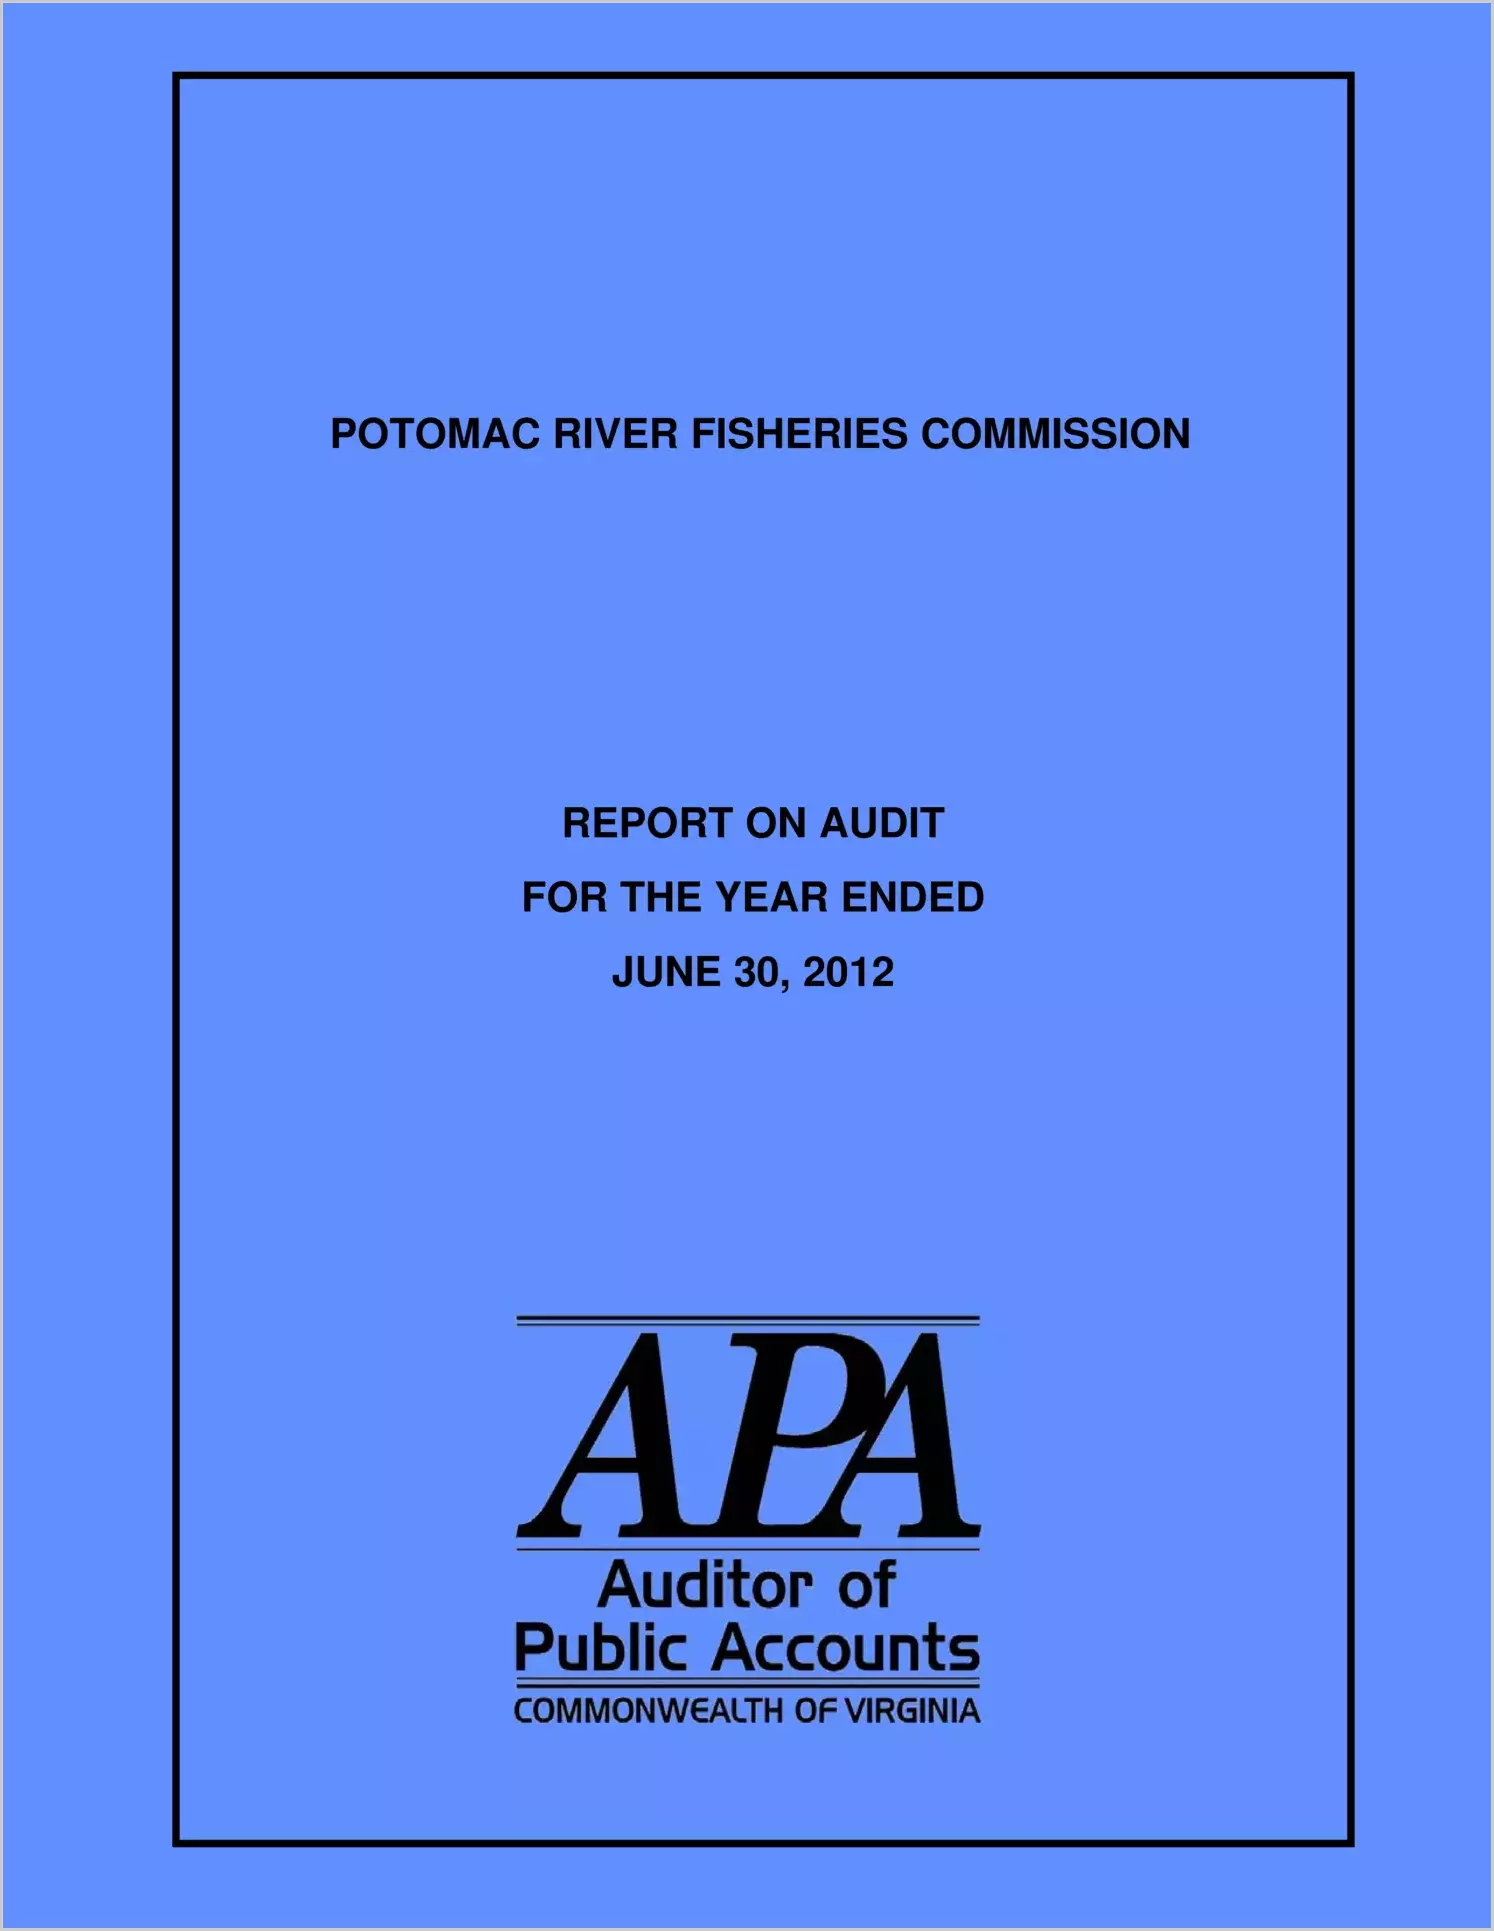 Potomac River Fisheries Commission report on audit for the year ended June 30, 2012